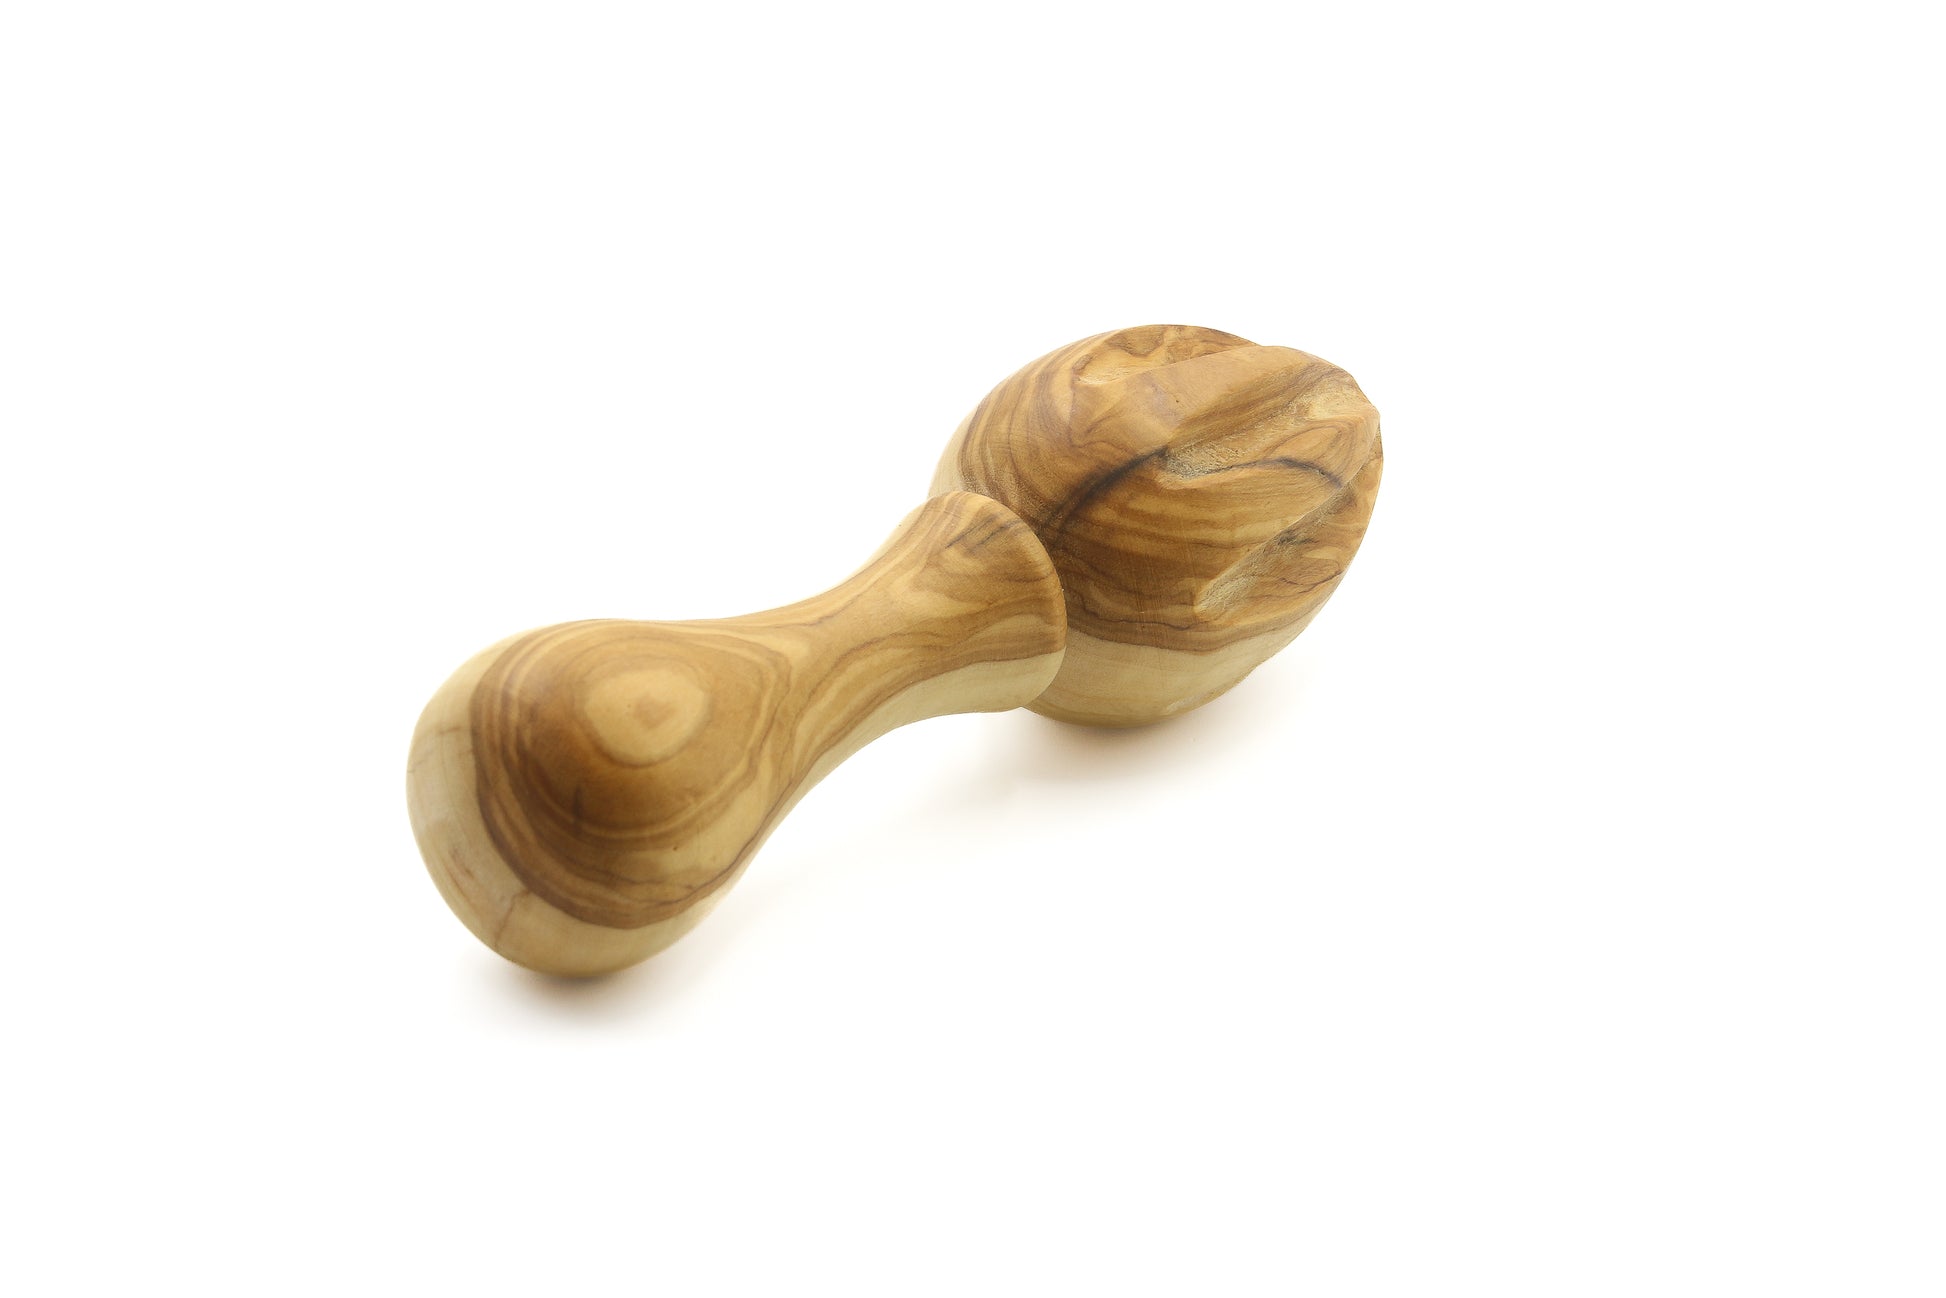 Olive wood lemon reamer with a classic design